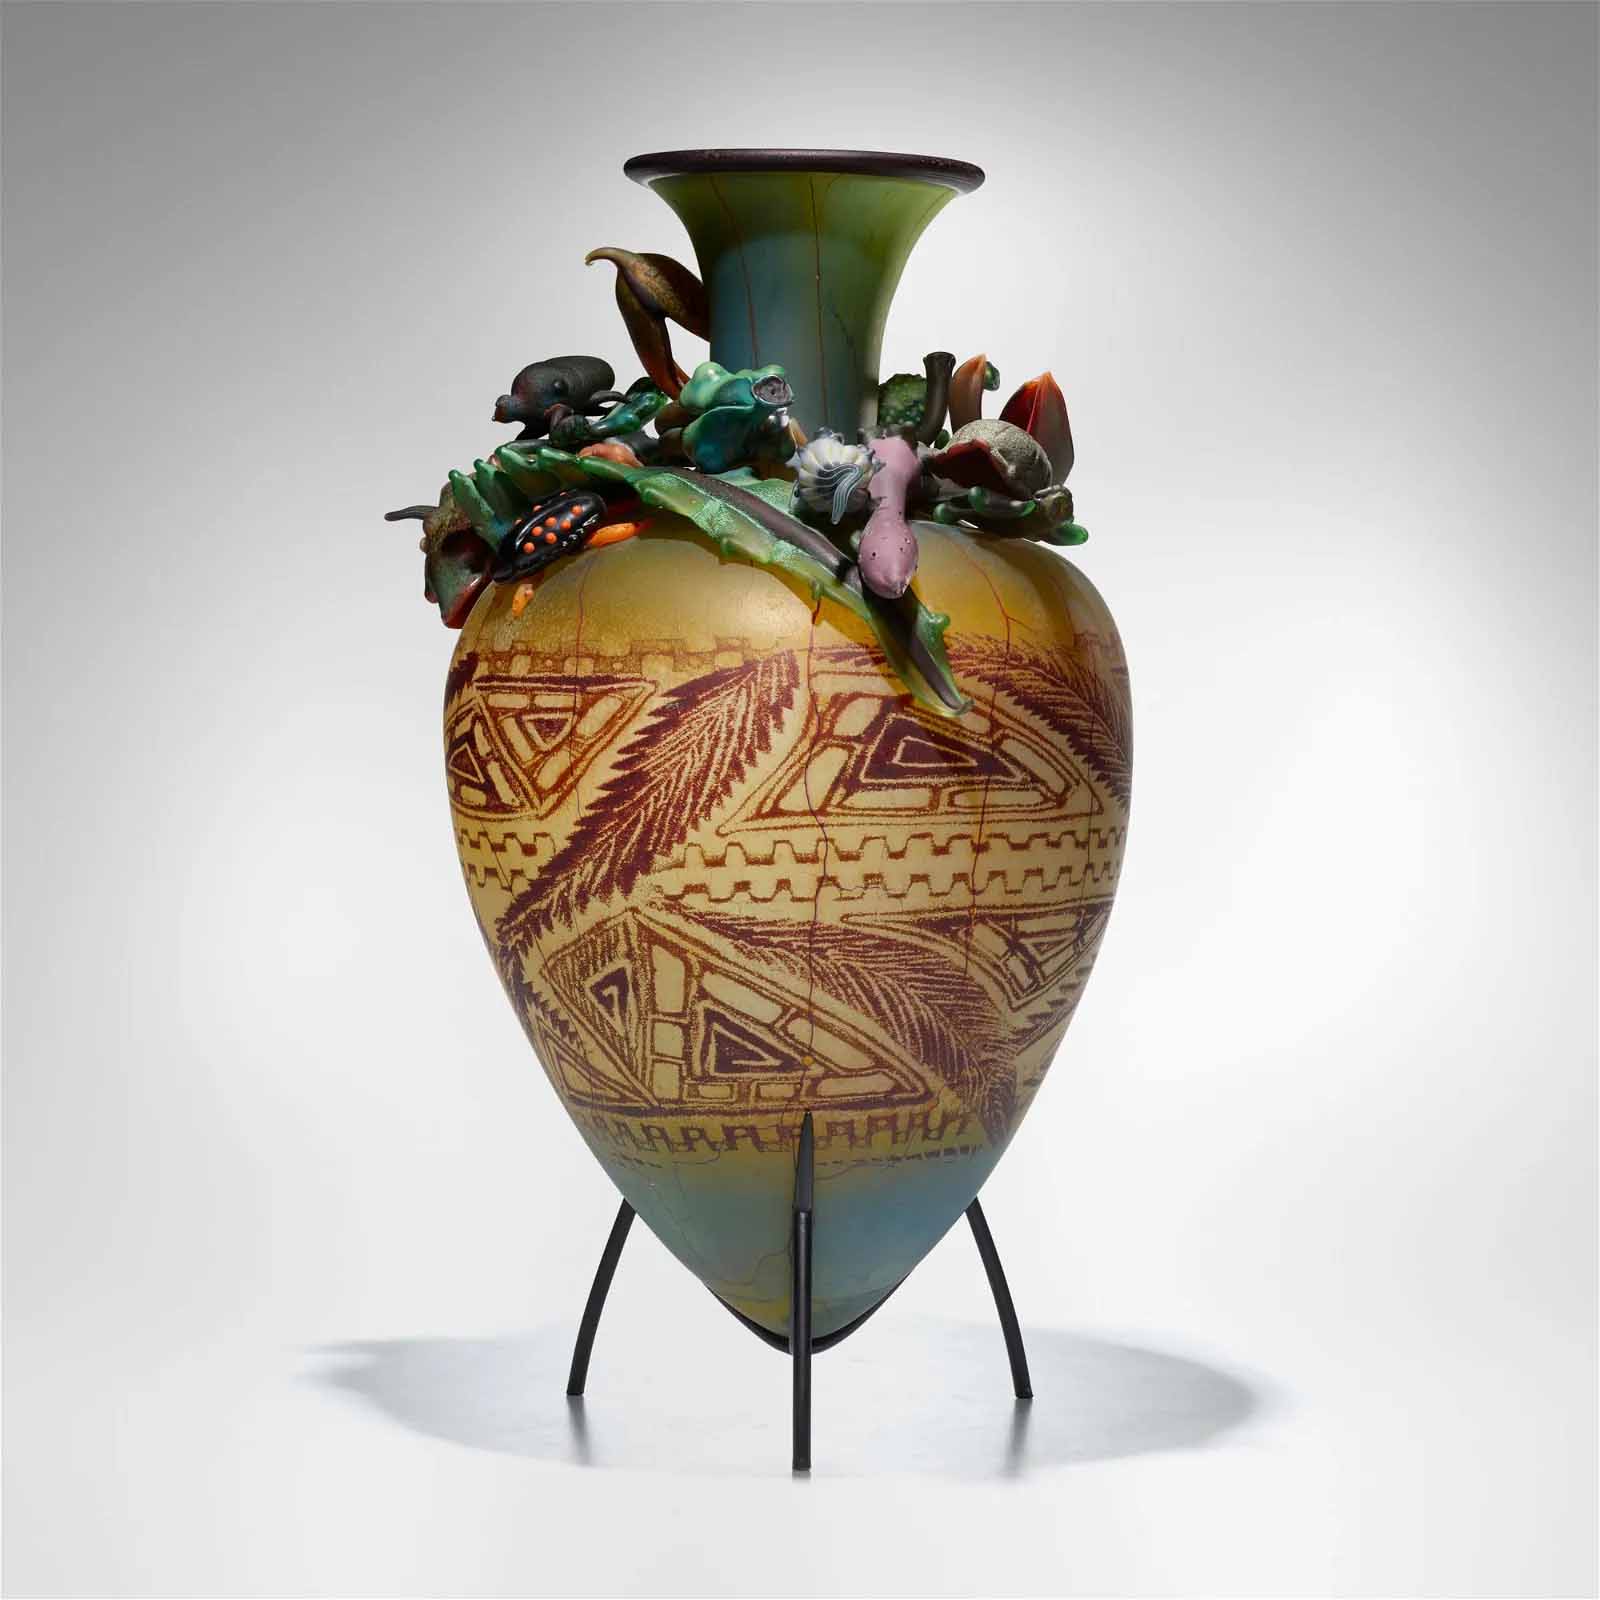 William Morris, Beetles with Flora glass vase, which sold for $310,000 ($406,100 with buyer’s premium) at Rago.